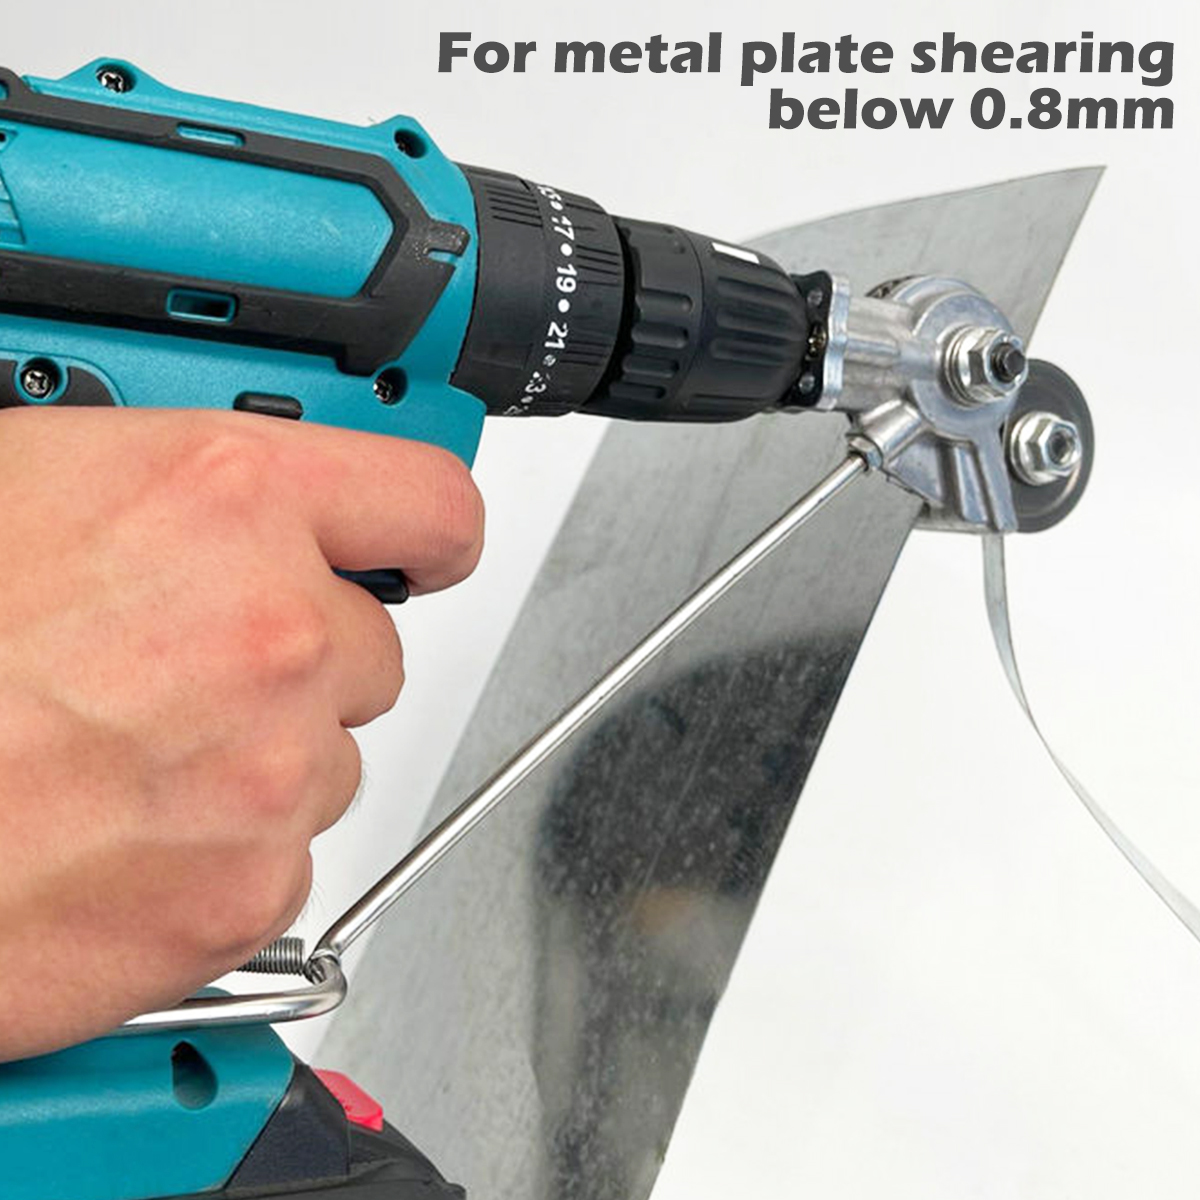 Gpoty Electric Drill Plate Cutter,Portable Metal Nibbler Cutter